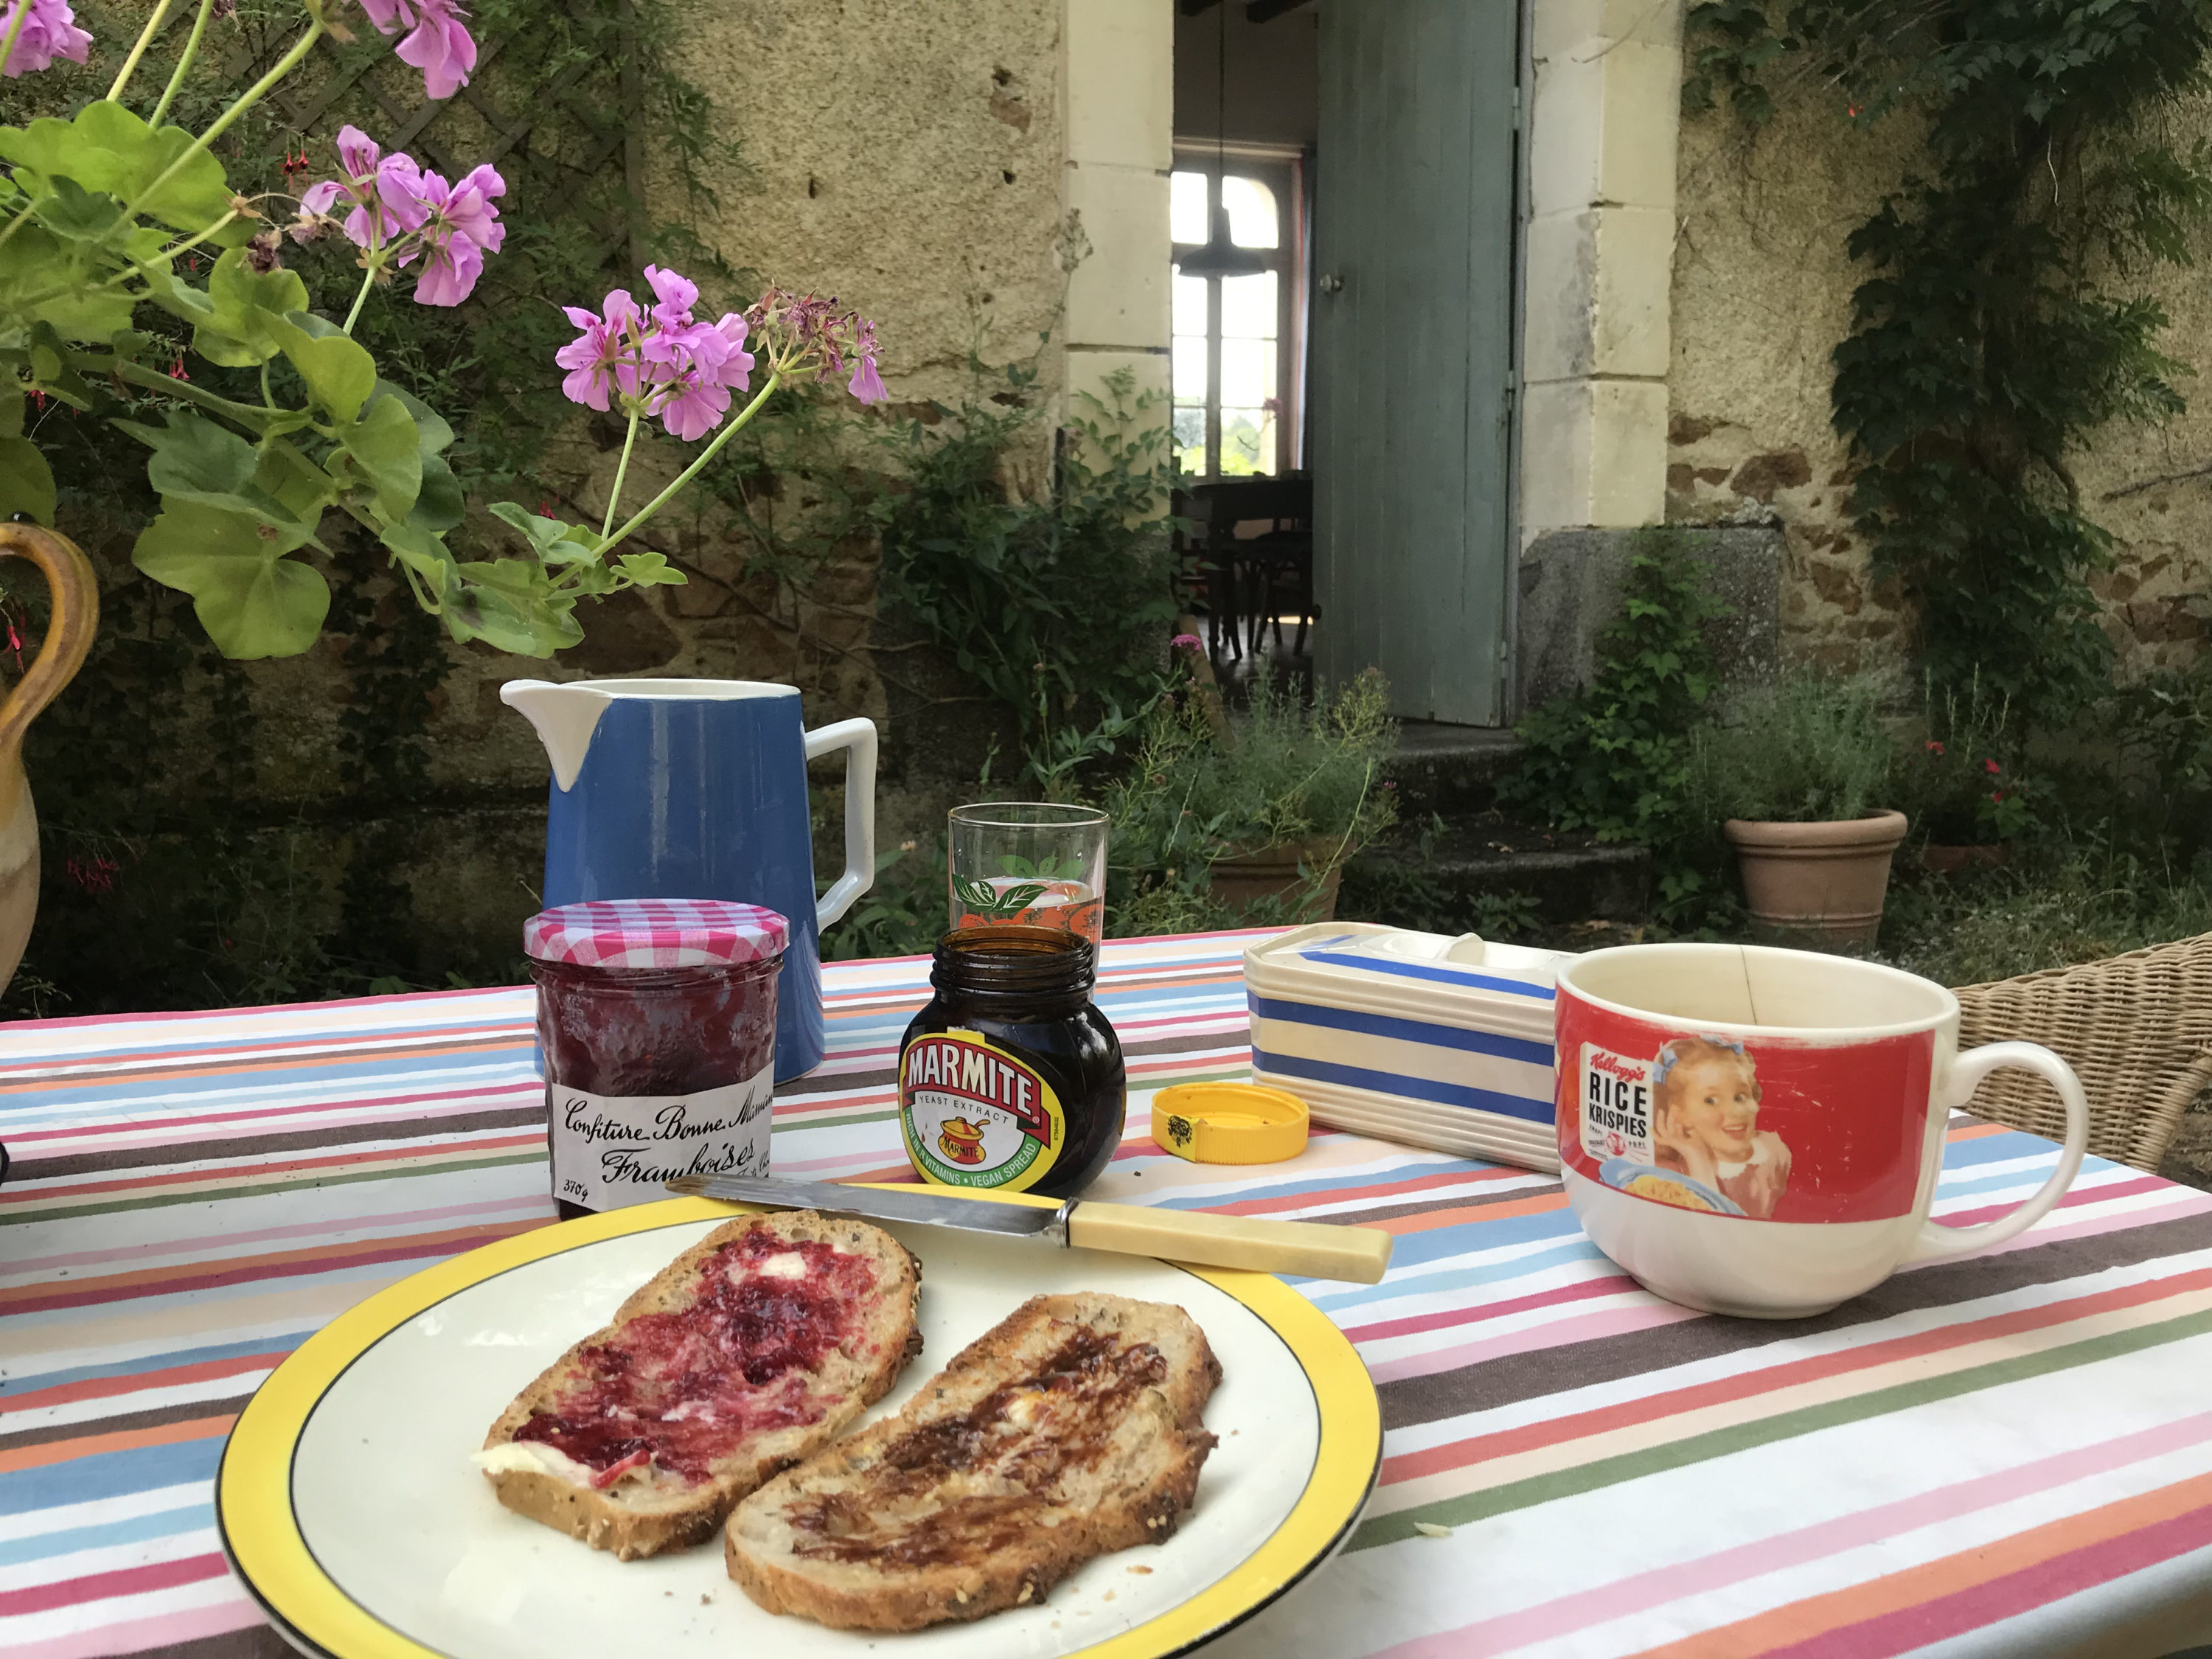 Anglo-French breakfast in the rear garden